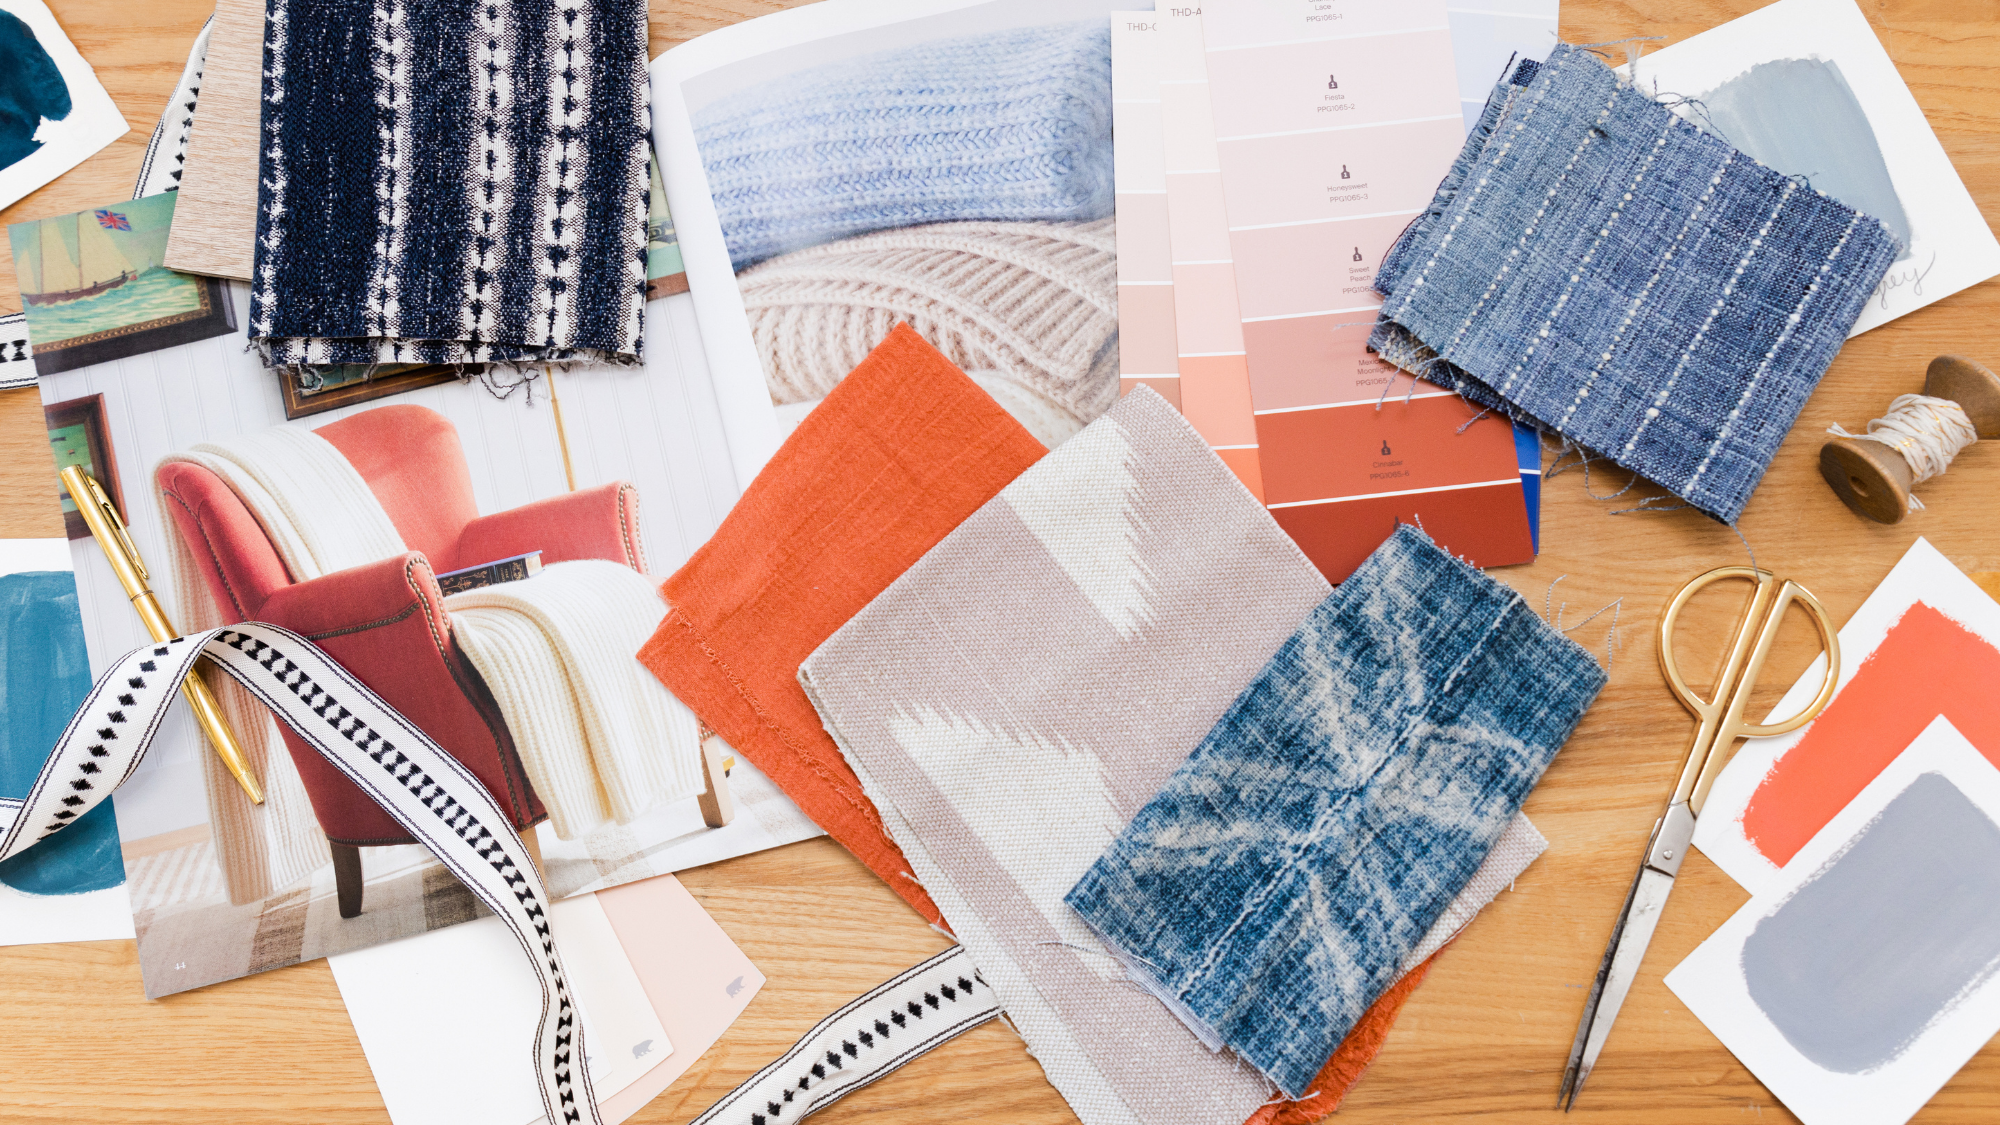 Amy’s 5 Tips for Using Textiles in Your Home Decor